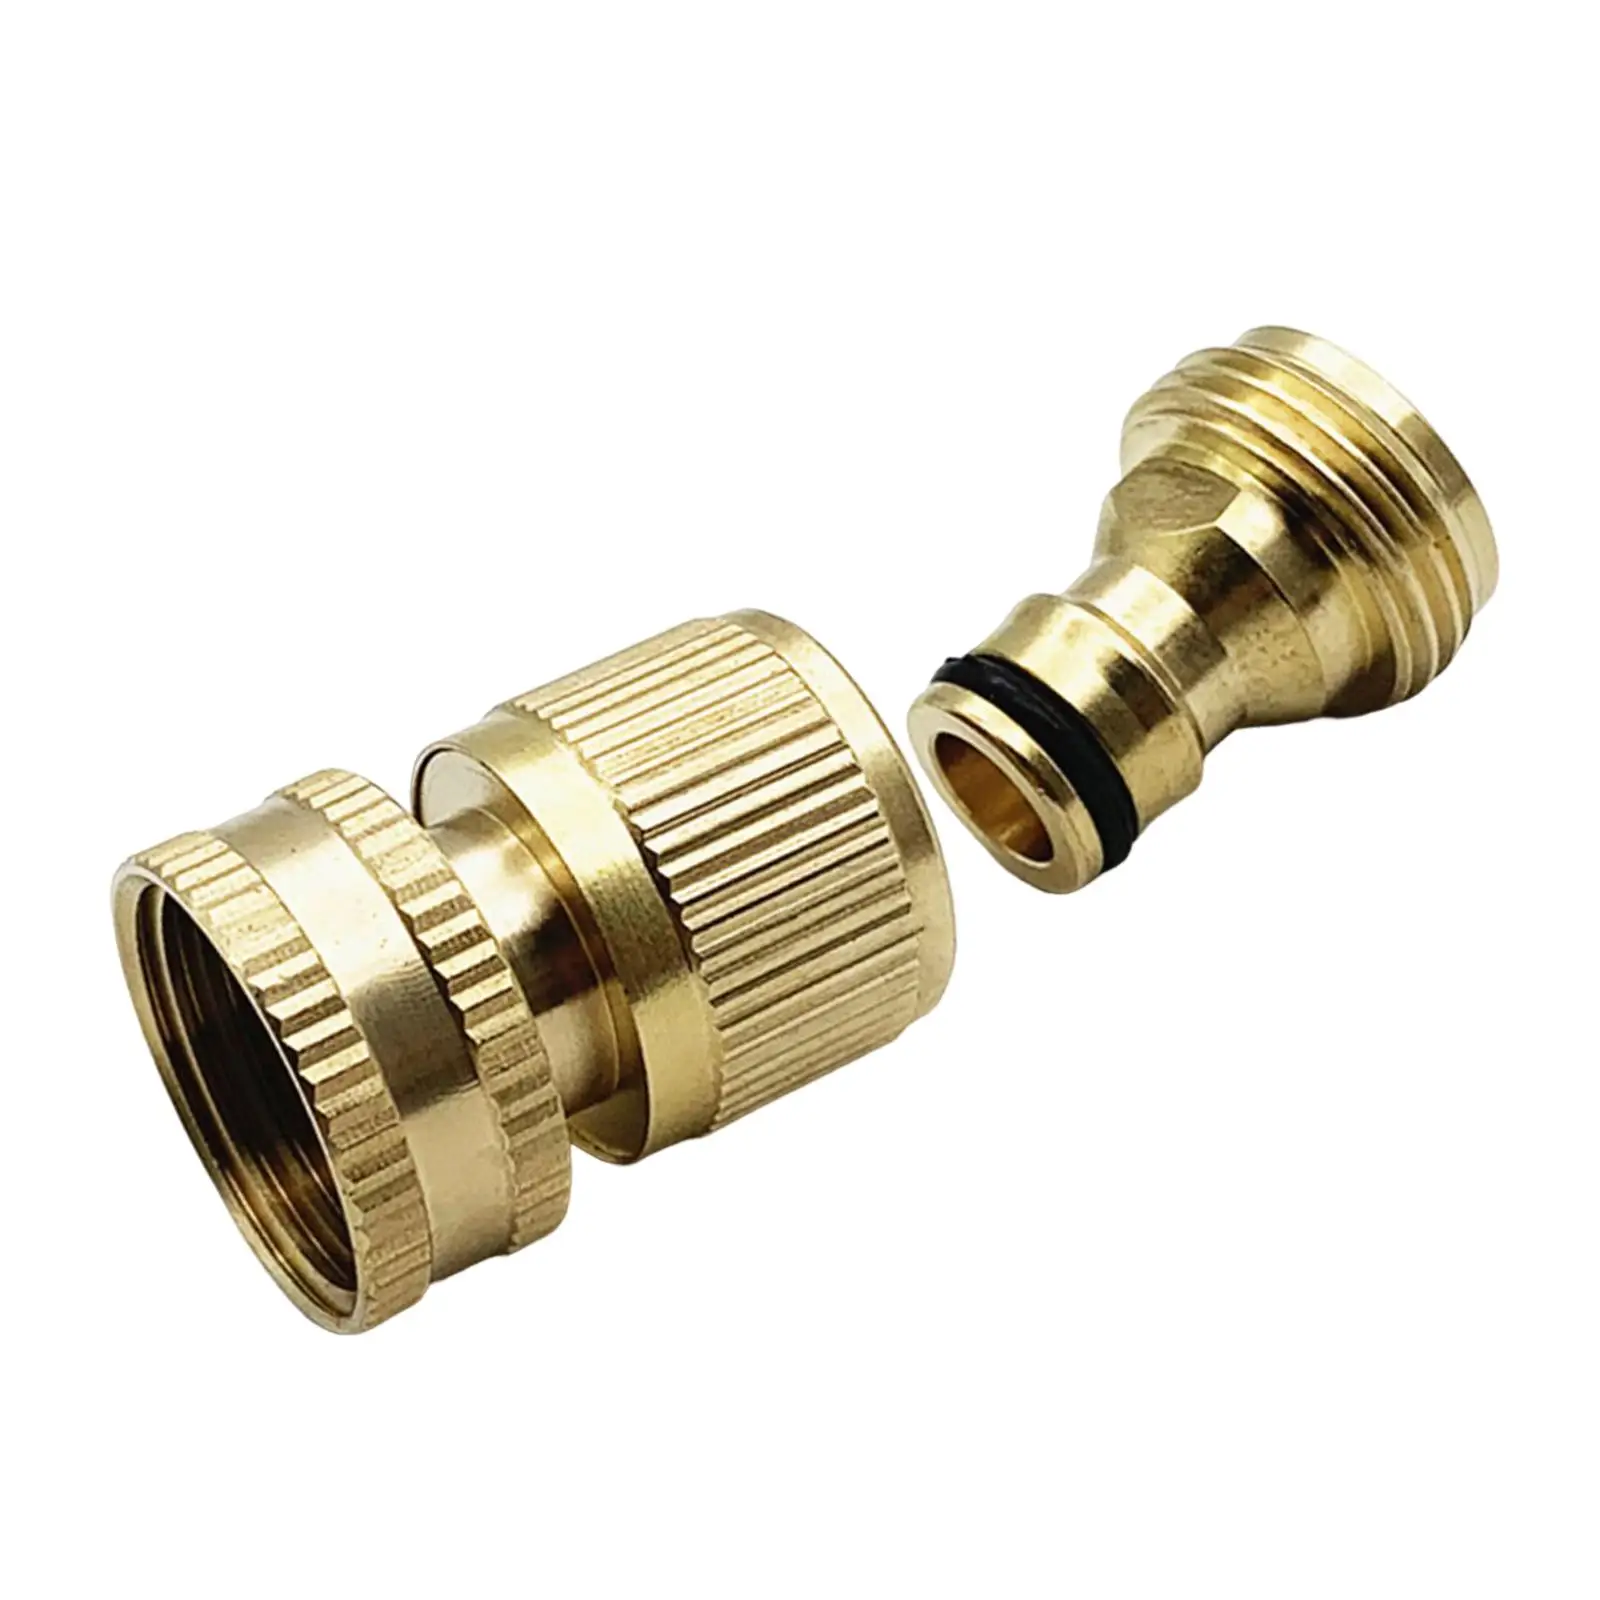 Brass Garden Hose Connector Pressure Washer Adapter 3/4 inch Water Hose Pipe Fitting for Watering Device Garden Hose